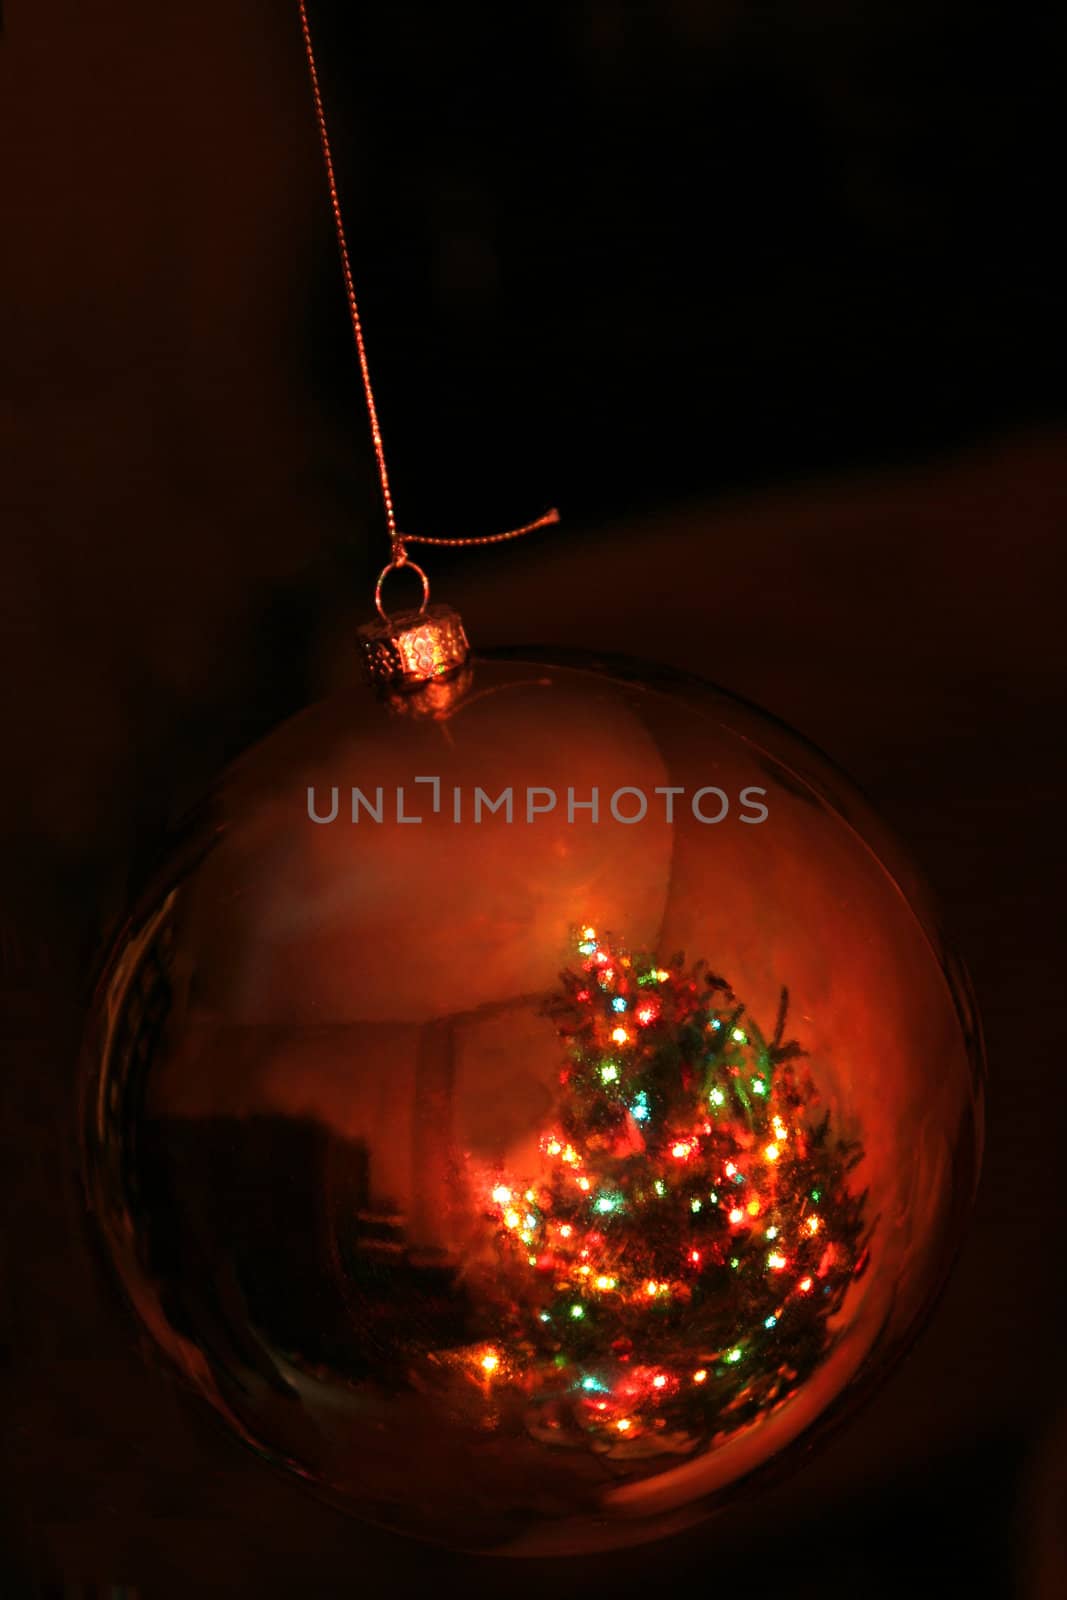 A reflection of a Christmas tree in a gold bauble ornament.
